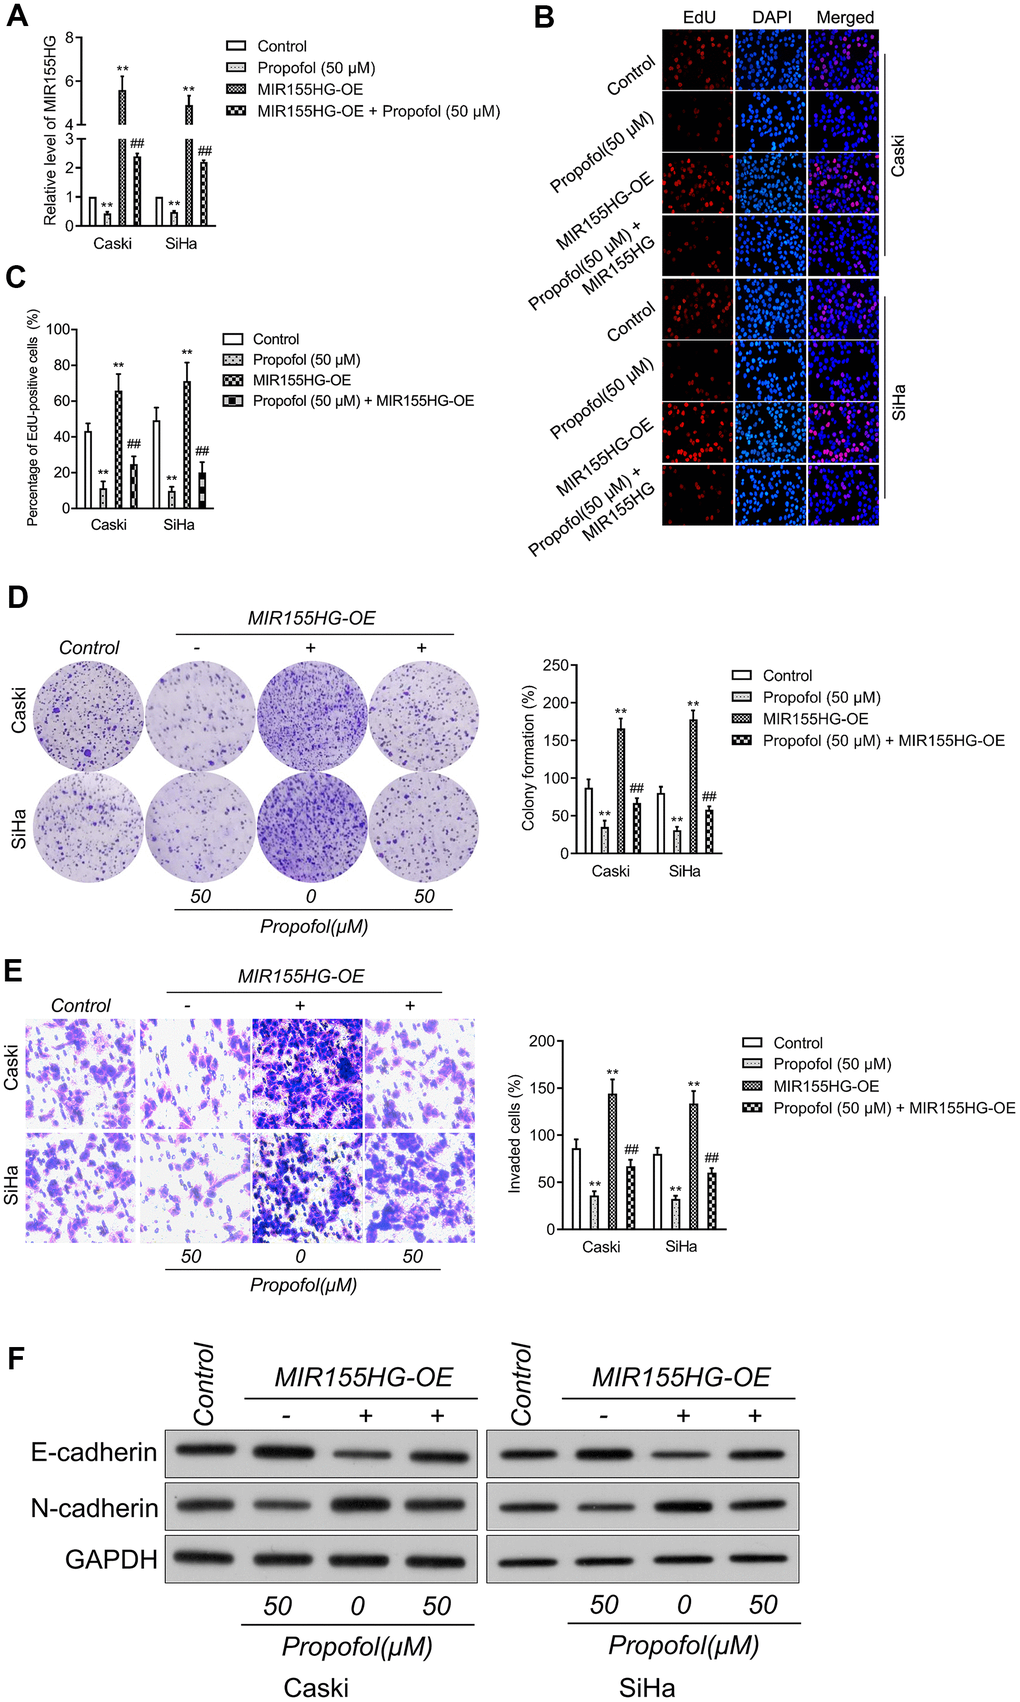 MIR155HG mediates the anti-cancer effect of propofol in cervical cancer cell. (A) MIR155HG overexpressing Caski and SiHa cells were exposed to propofol (50 μM). The level of MIR155HG was determined by qRT-PCR. (B, C) EdU staining assay showed that the proliferation of Caski and SiHa cell were increased after MIR155HG overexpression in the presence of propofol. (D) Colony formation assay showed that the growth of Caski and SiHa cell were increased after MIR155HG overexpression in the presence of propofol. (E) Transwell invasion assay showed that the invasion ability of Caski and SiHa cell were increased after MIR155HG transfection. **P##PF) The expressions levels of EMT markers in propofol-treated Caski and SiHa cells after MIR155HG transfection as determined by western blot analysis.